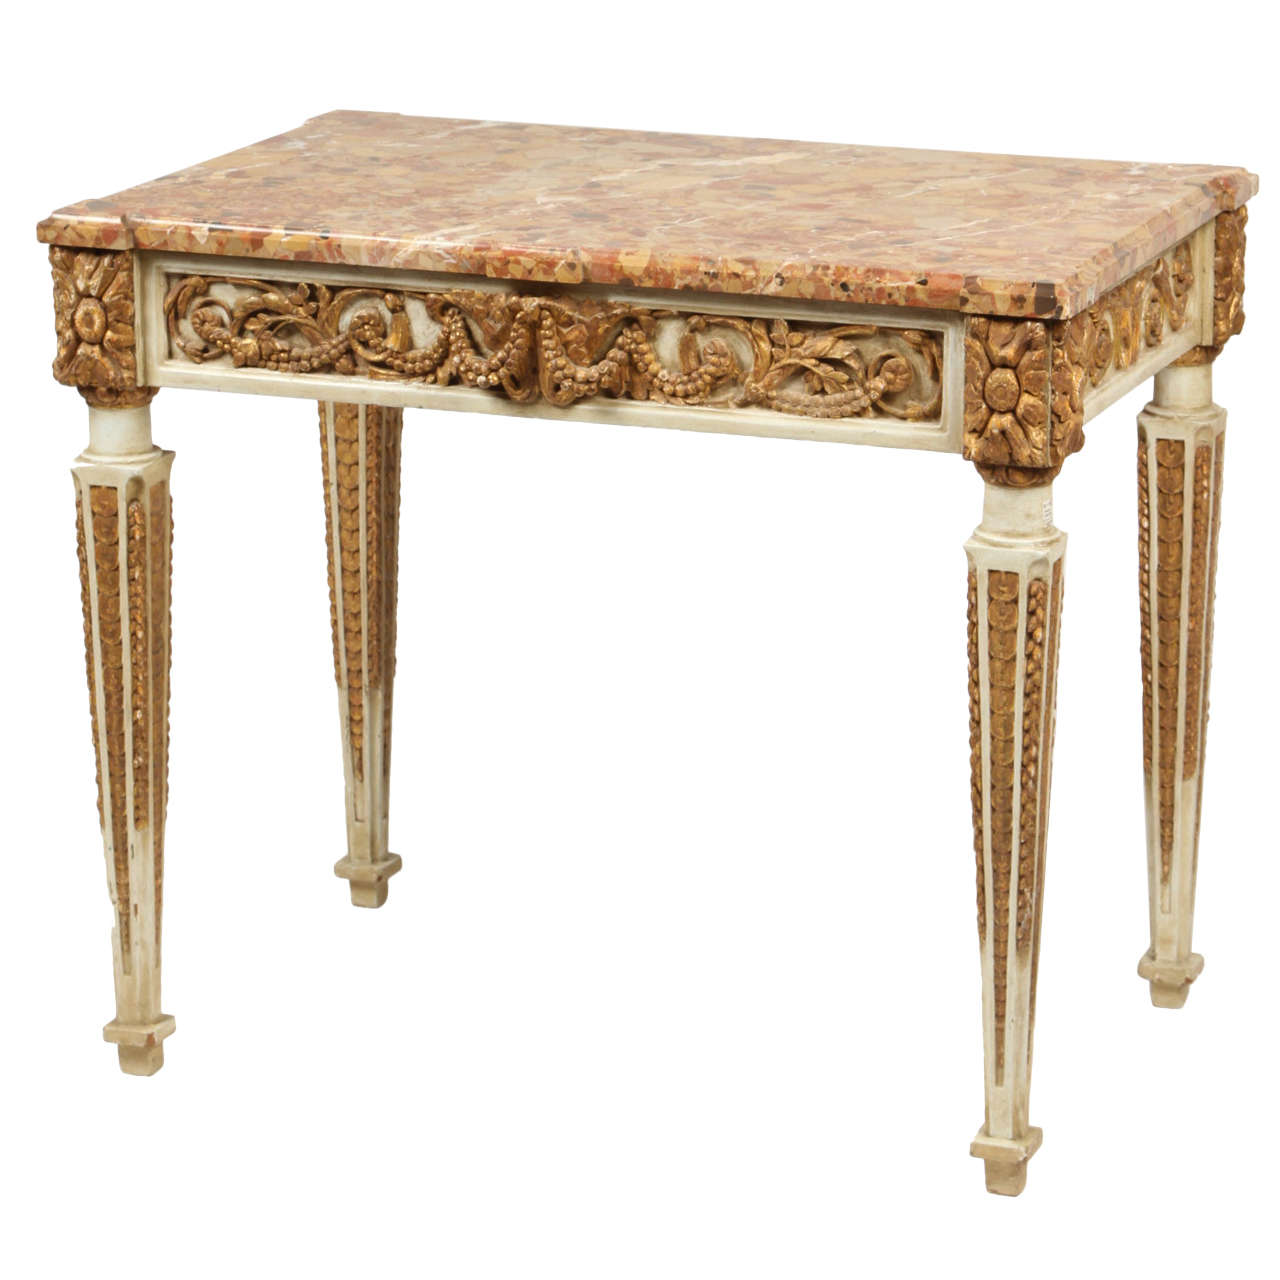 Carved and Gilt Italian Console Table, Late 18th Century For Sale